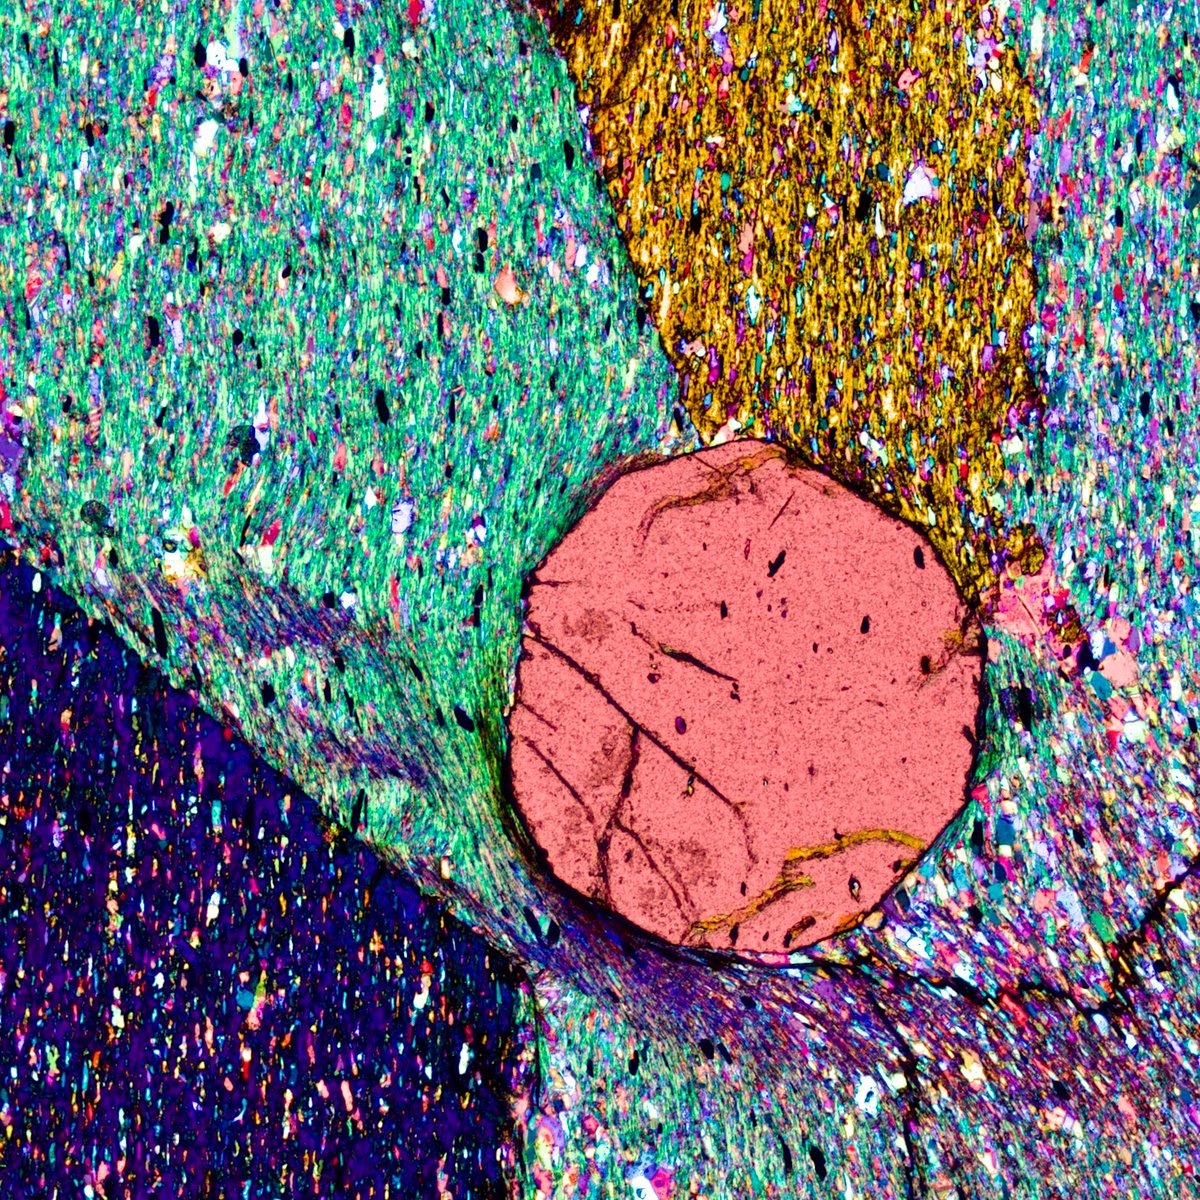 📷
#thinsectionthursday
In New Mexico Staurolite is more inclusive than Garnet...
1,7 Ga-old schist from the Picuris mountains.

#science #art #rocks #geology #colors #wallart #nature #STEM #metamorphism #microscope #photography #week #inclusivedevelopment